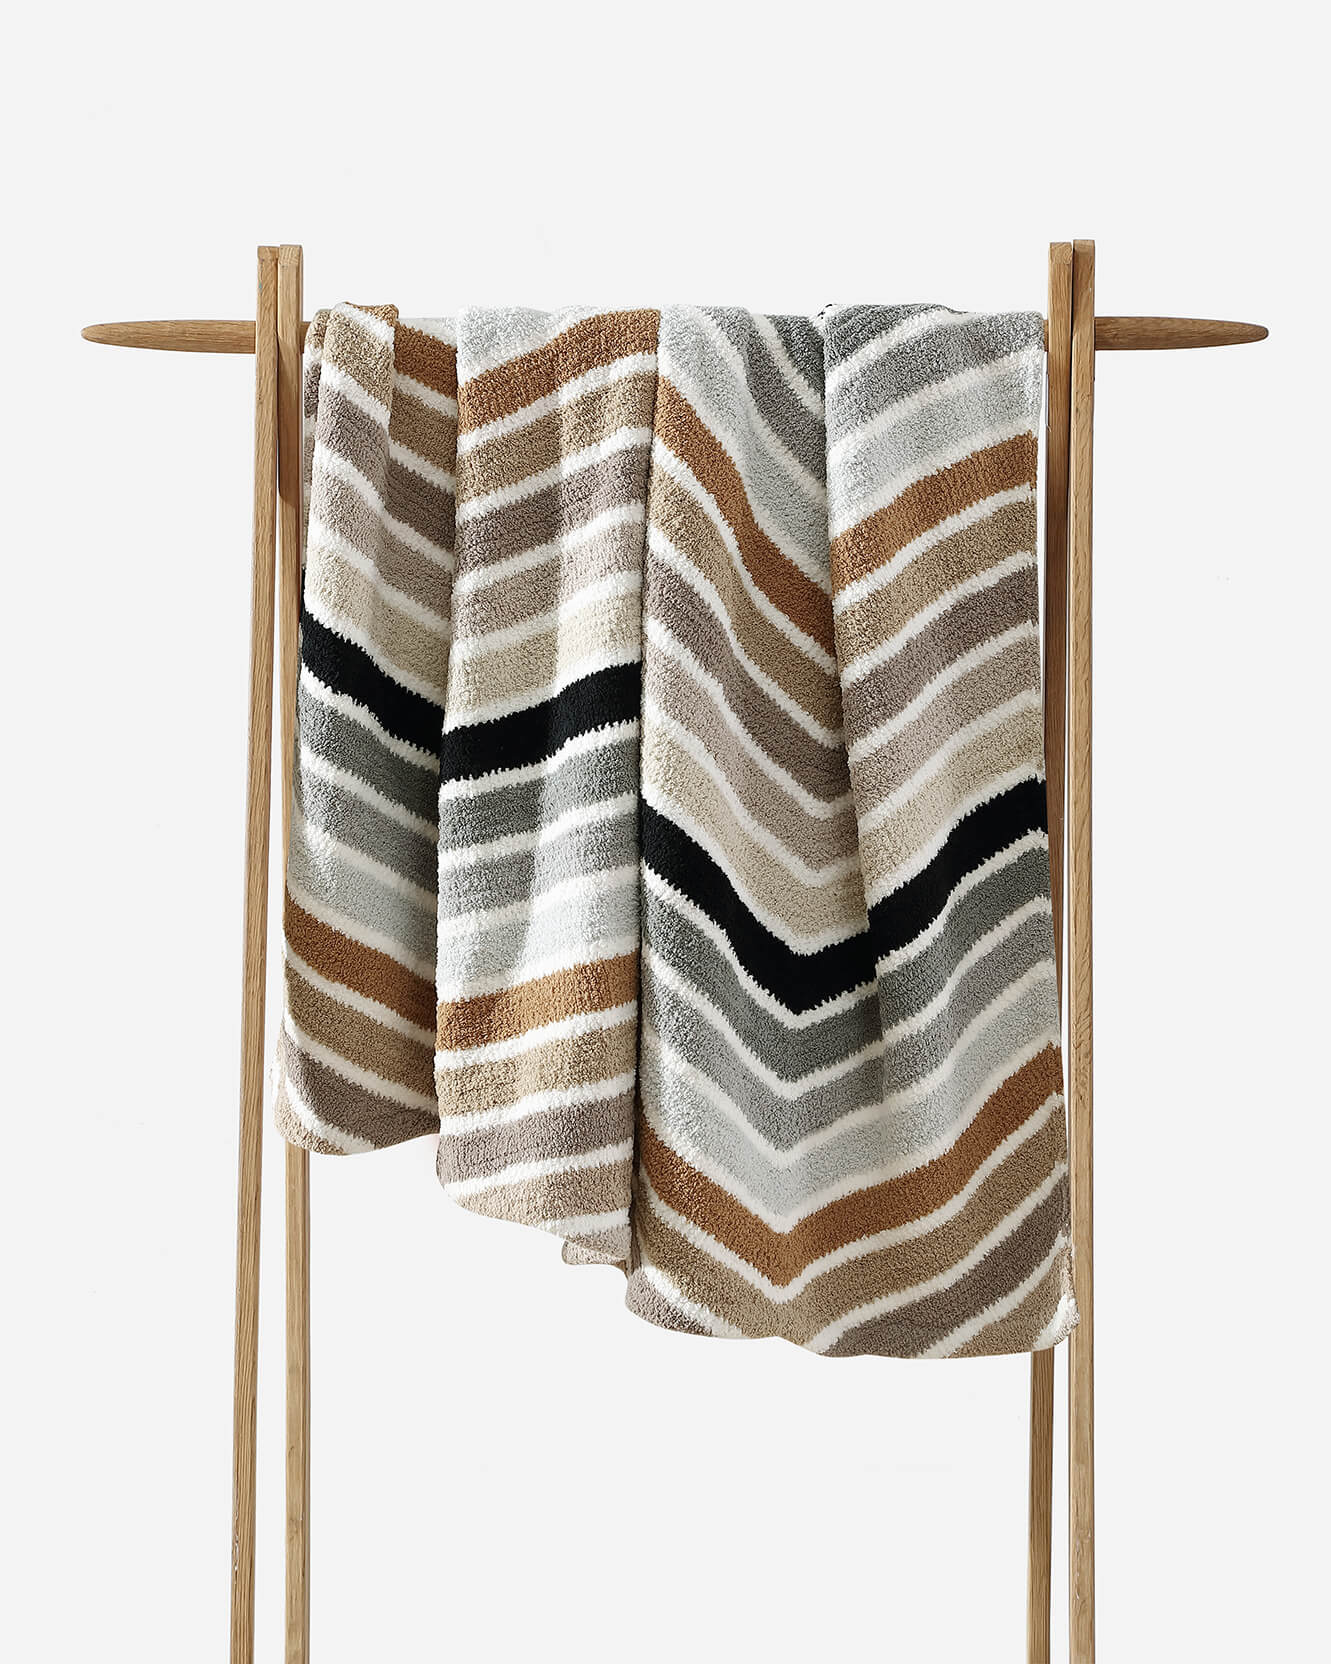 A cozy blanket draped over a wooden rack. This Cusco Lightweight Throw by Sunday Citizen features a striped zigzag pattern in shades of brown, beige, gray, and black, creating a warm and inviting look. The snug fabric is also machine washable for easy care.